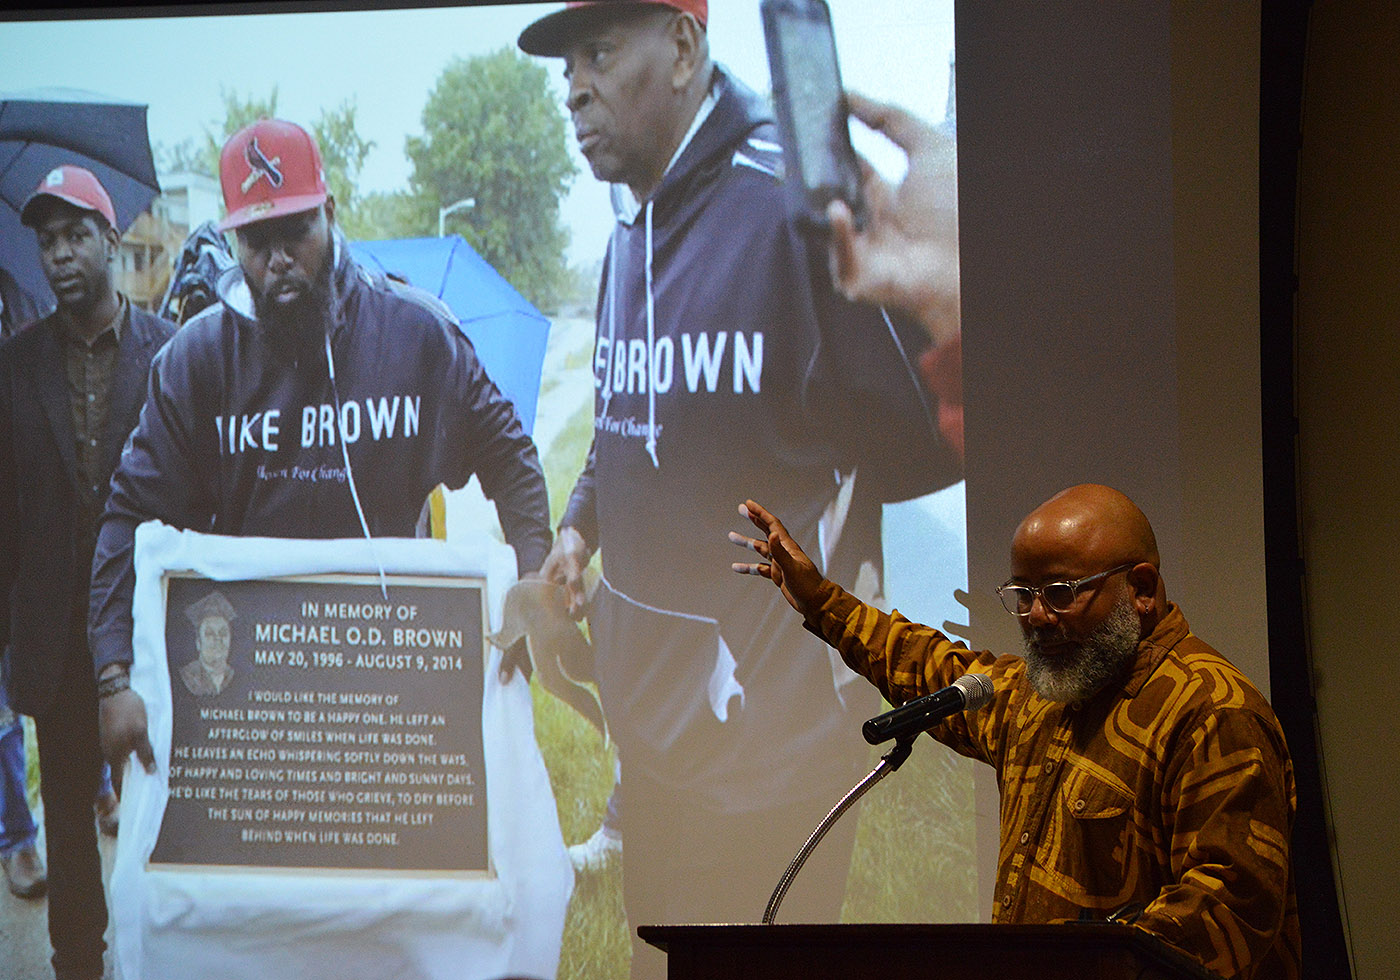 The 26th Annual Dwight L. Greene Symposium presented Black Phoenix Rising, a multimedia, digital scholarship, and cultural arts project exploring black people’s ways of resisting material and symbolic death in American life and culture.